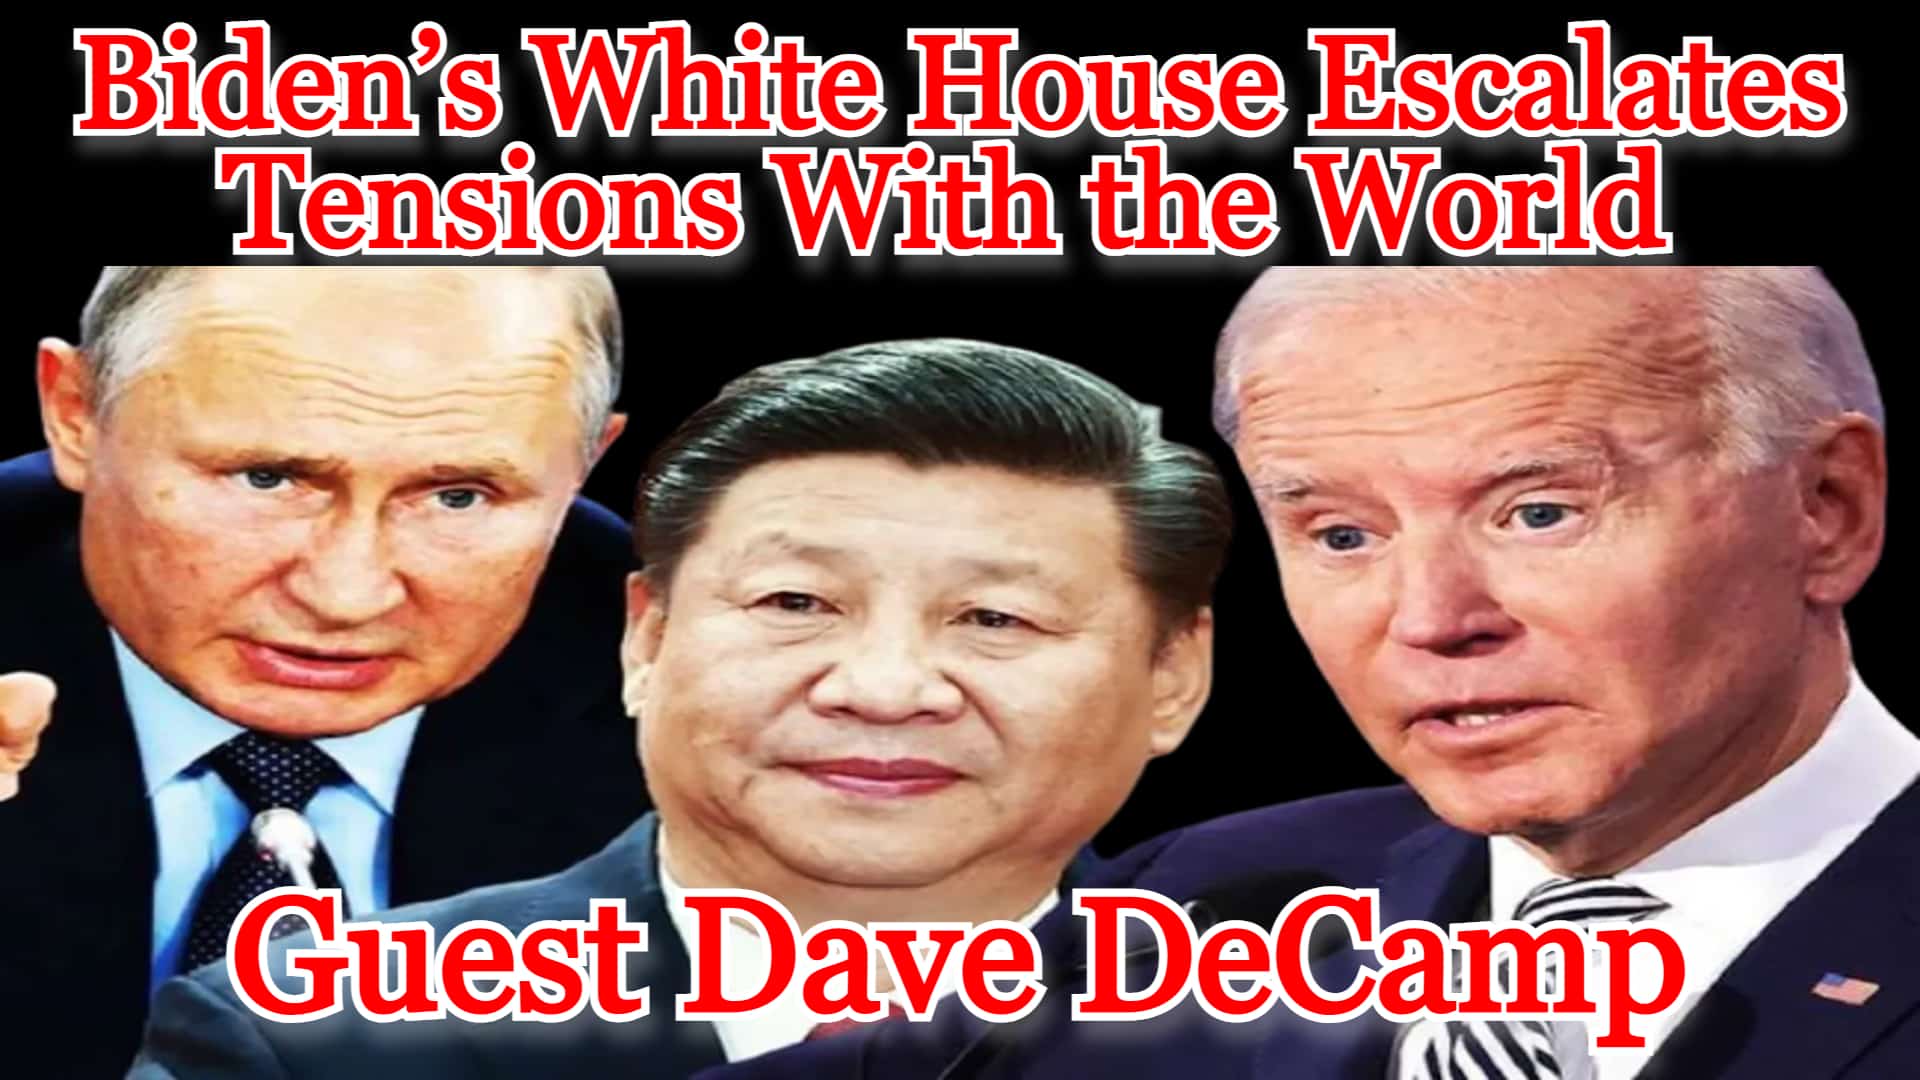 COI #287: Biden’s White House Escalates Tensions With the World guest Dave DeCamp